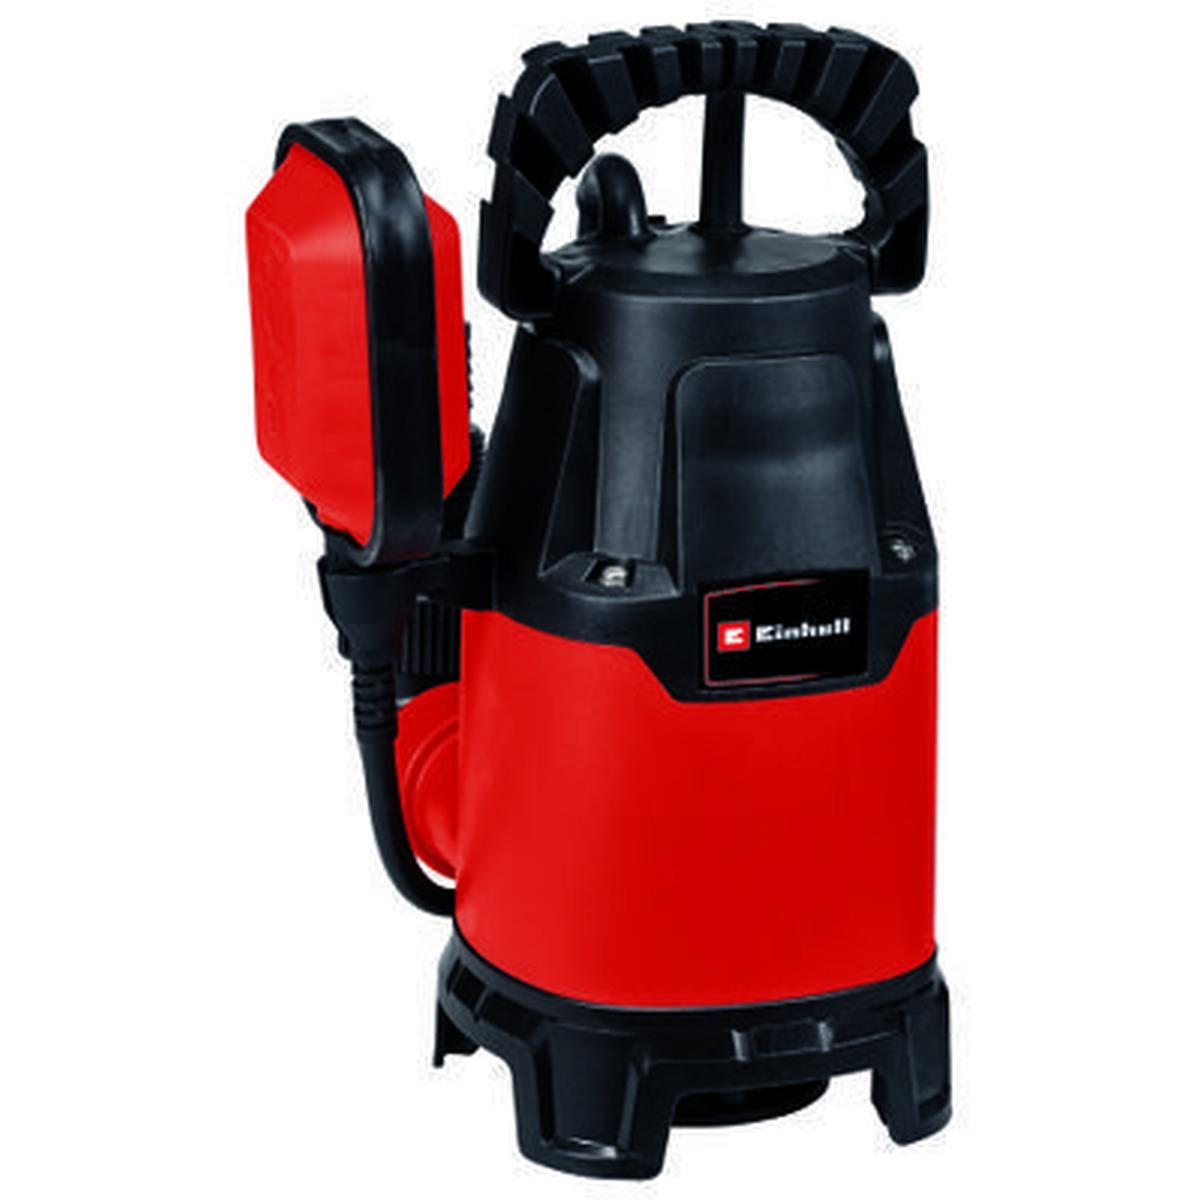 PROMO EINHELL 4181530 - Pompa a immersione GC-DP 3325